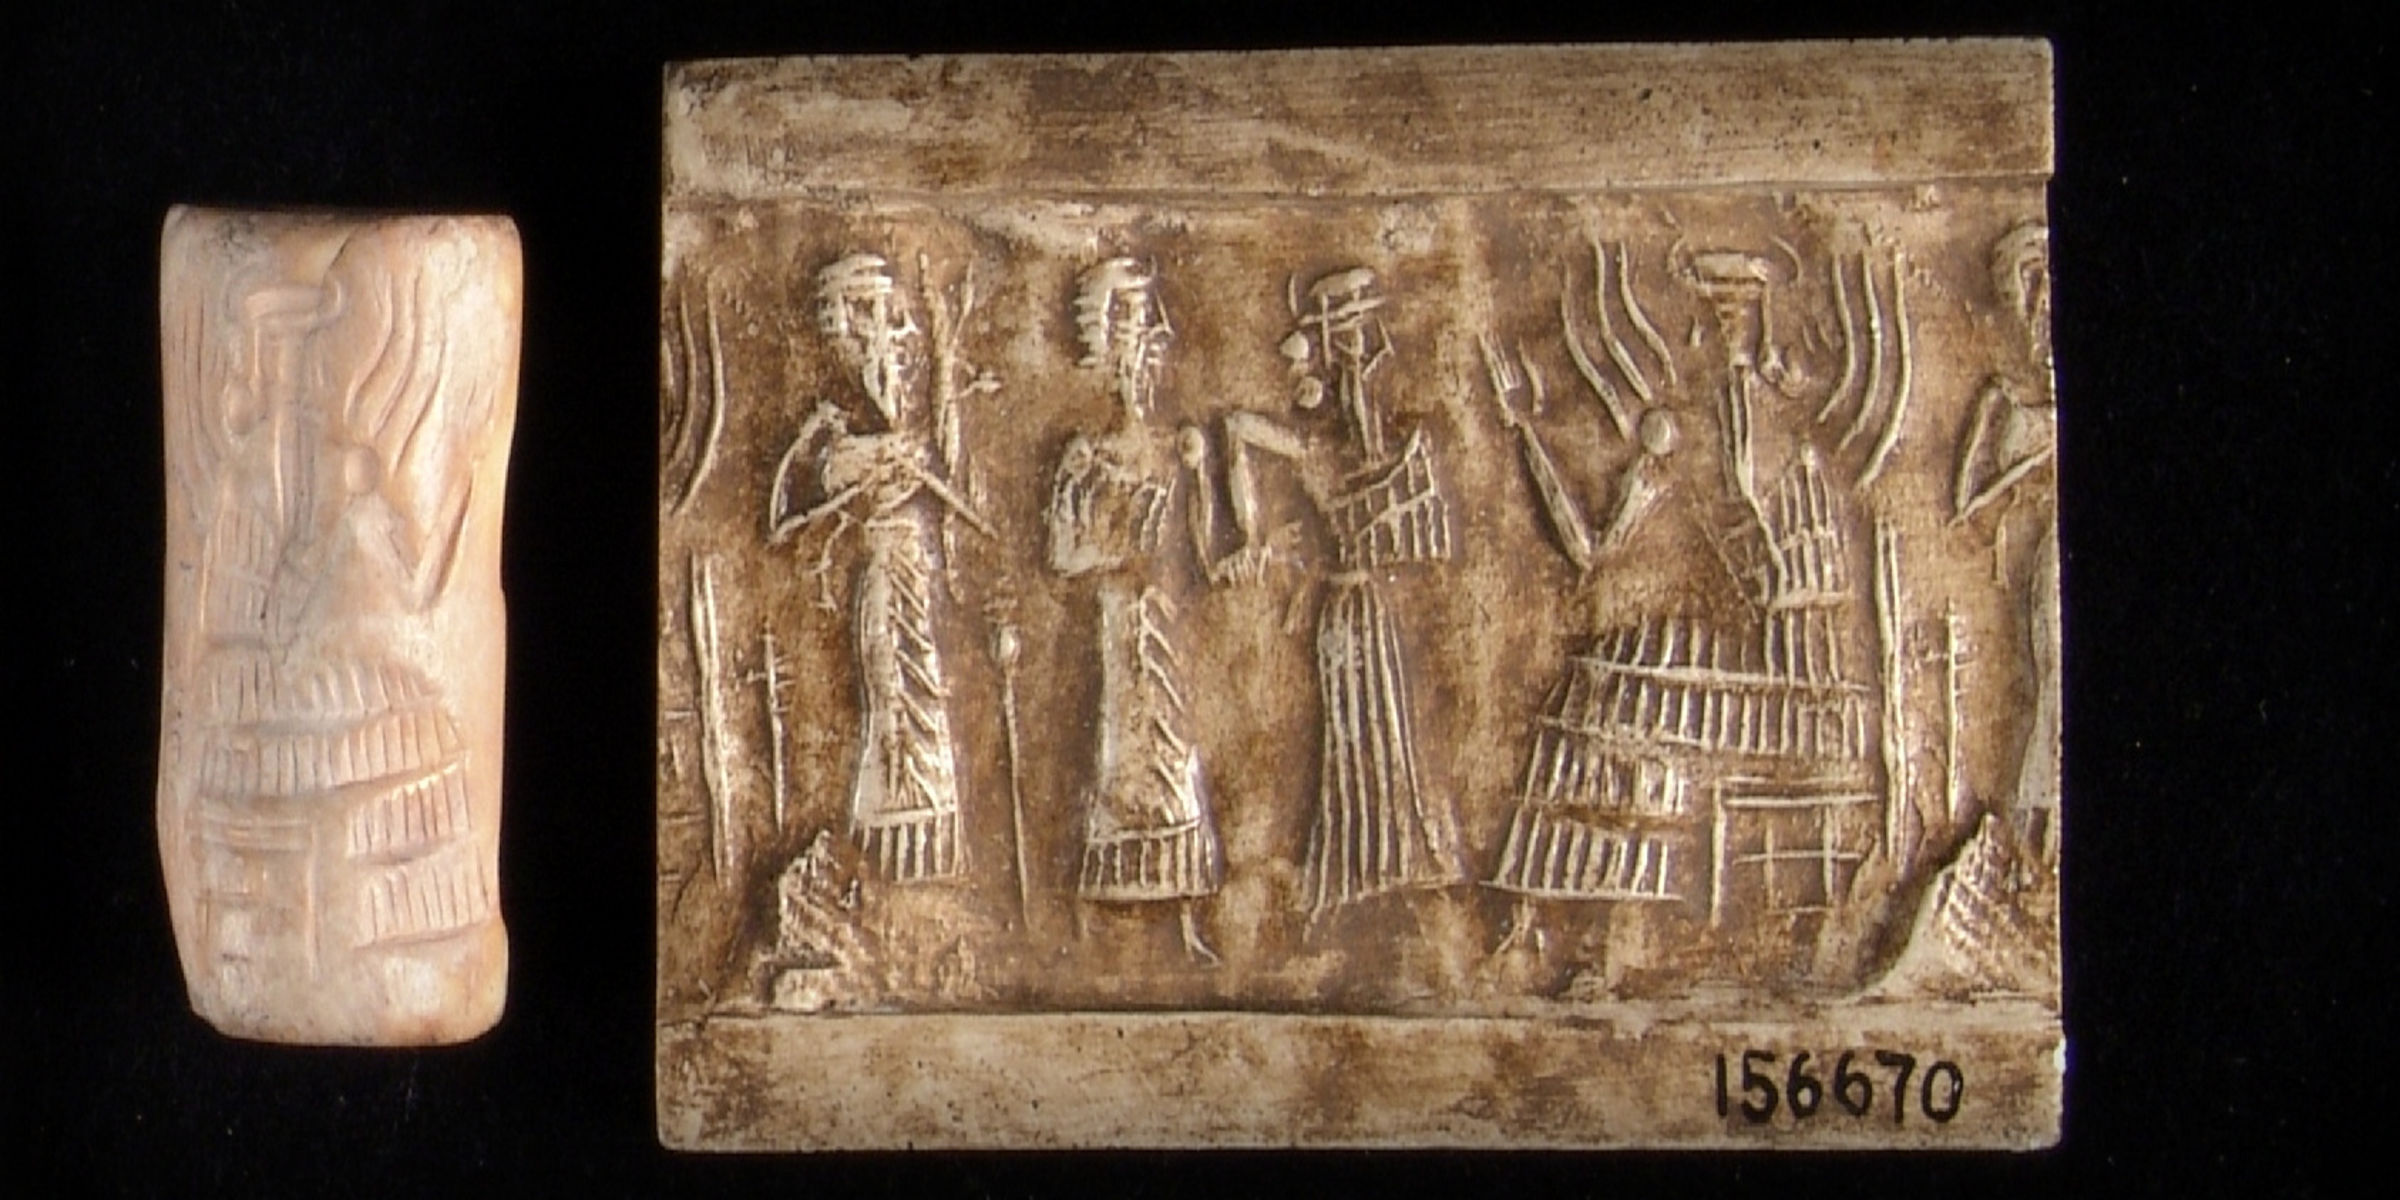 Akkadian period shell cylinder seal with its impression from Kish, Iraq. Catalog Number 1497.156670. © The Field Museum.